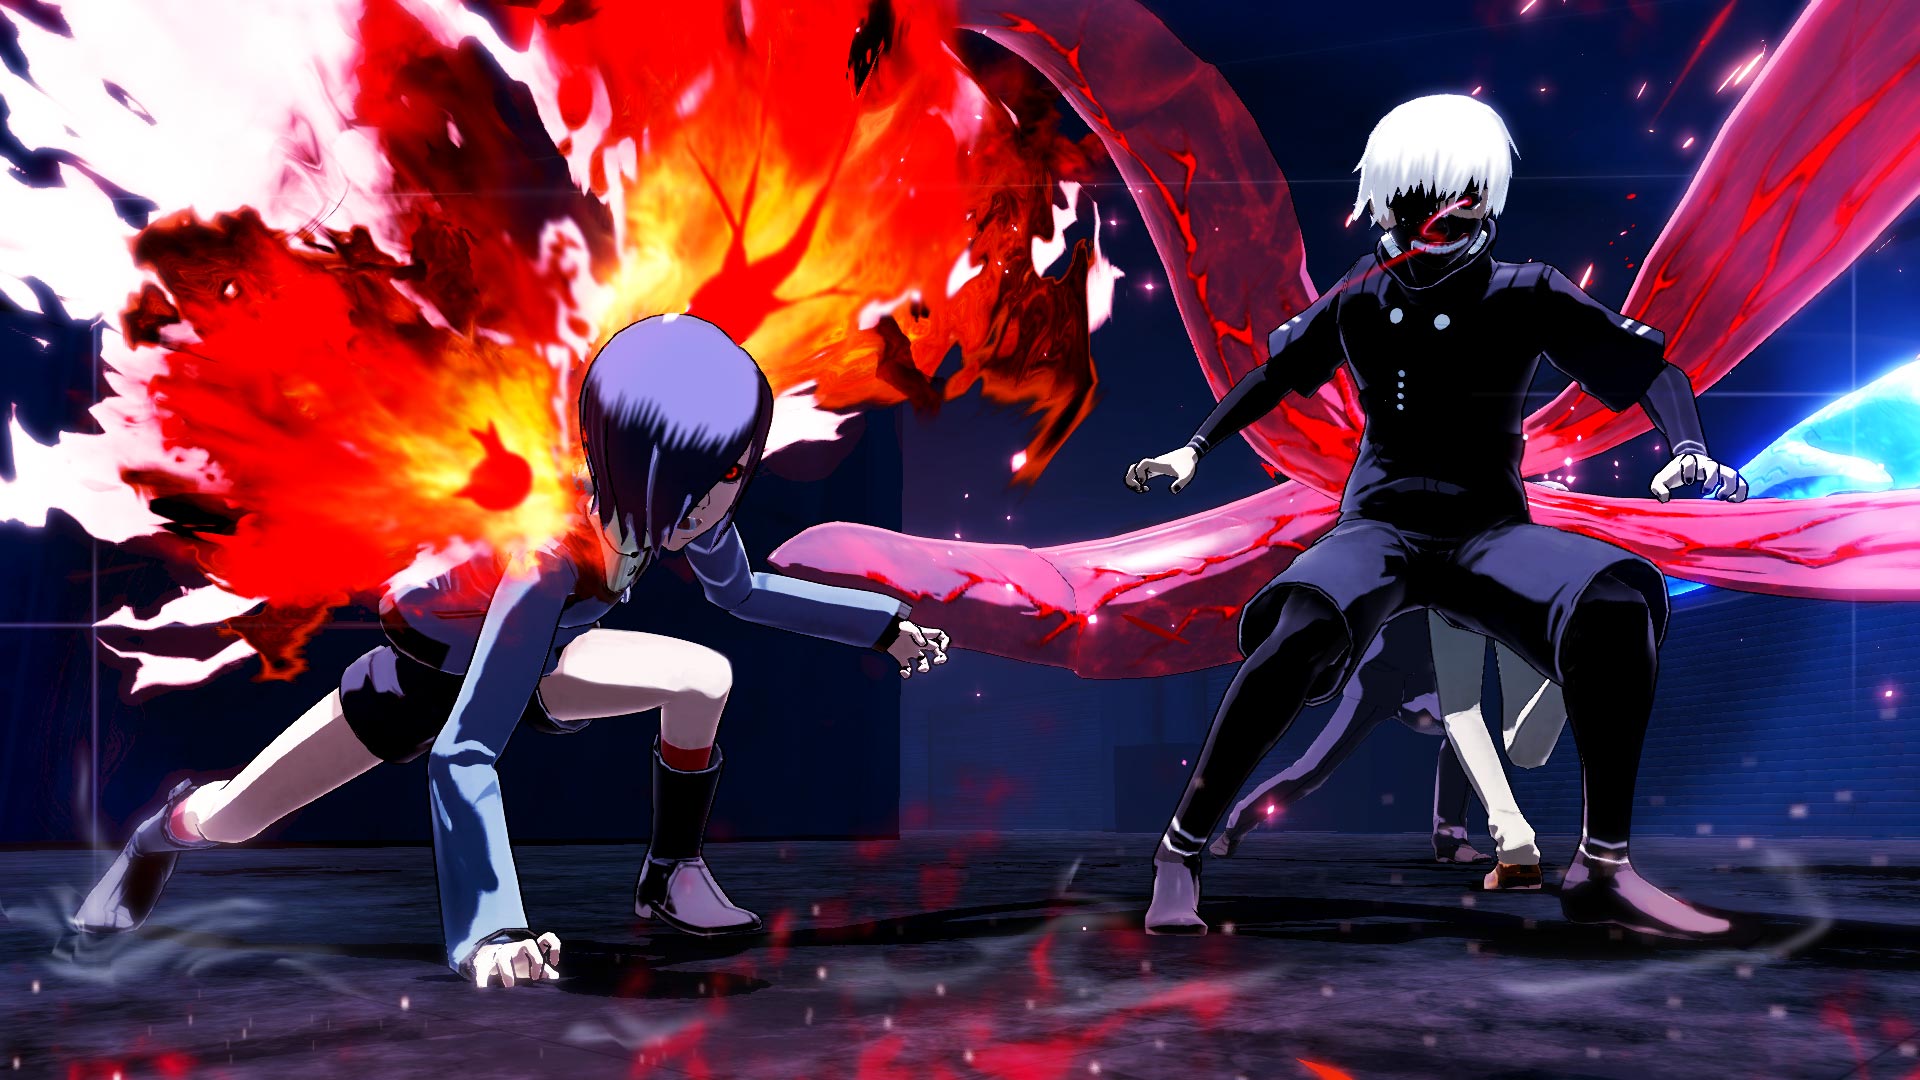 Tokyo Ghoul Ps4 Release Date Off 53 Www Bashhguidelines Org